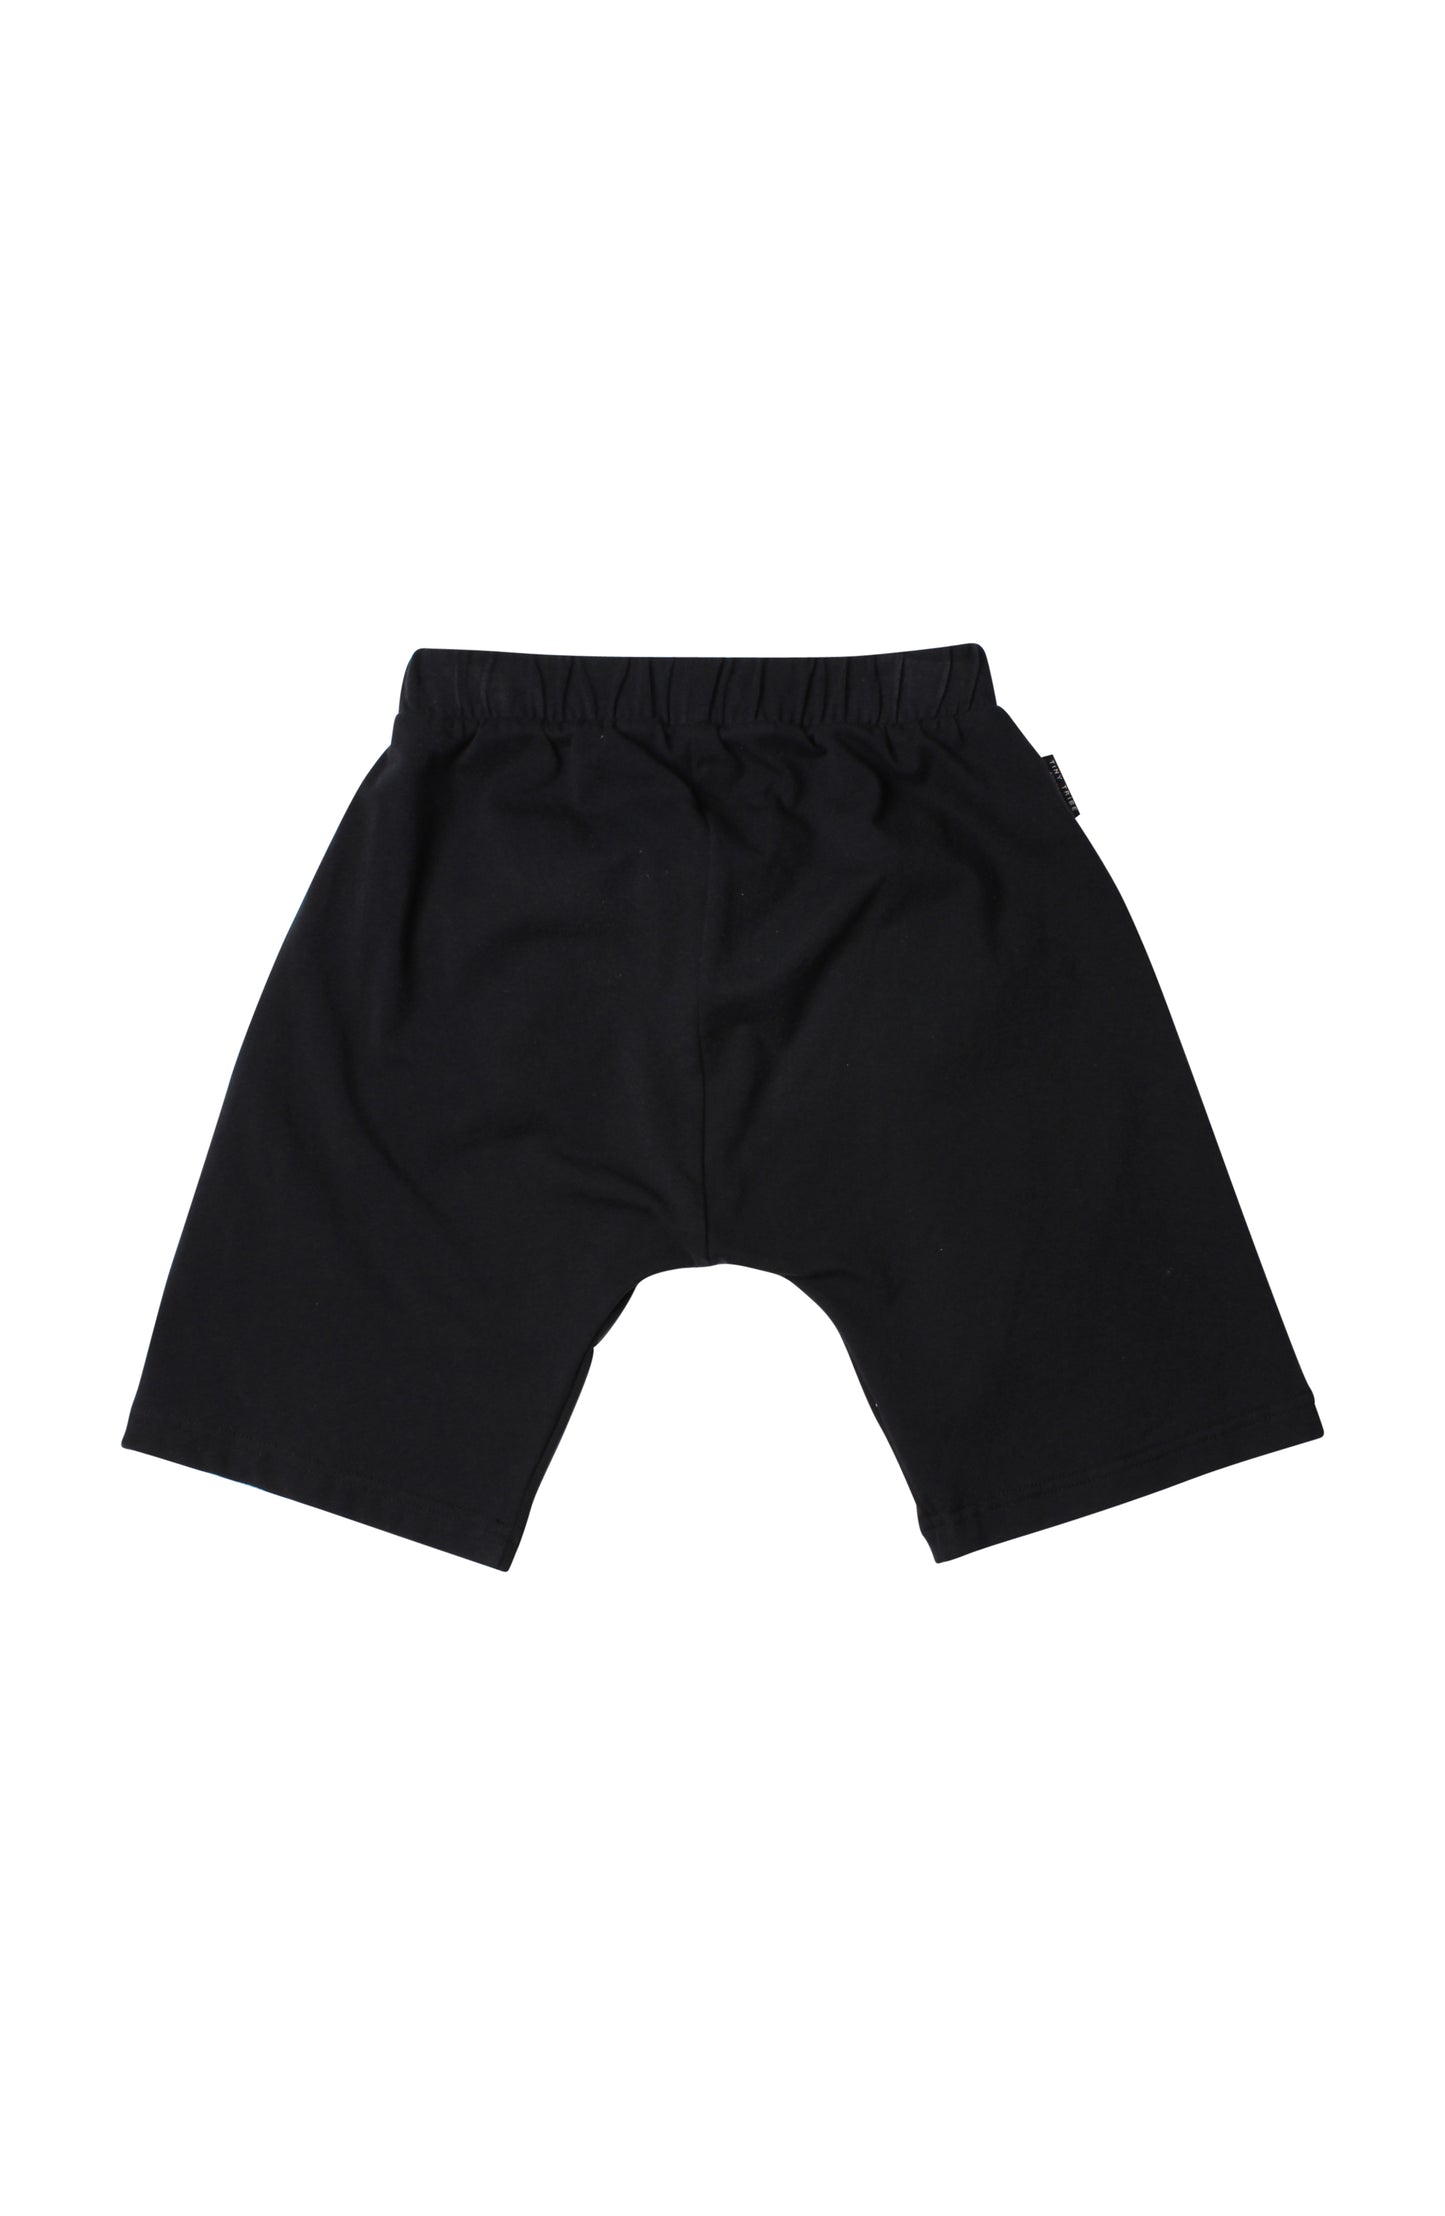 *Last One* Tiny Tribe X Relaxed Short - Size 0